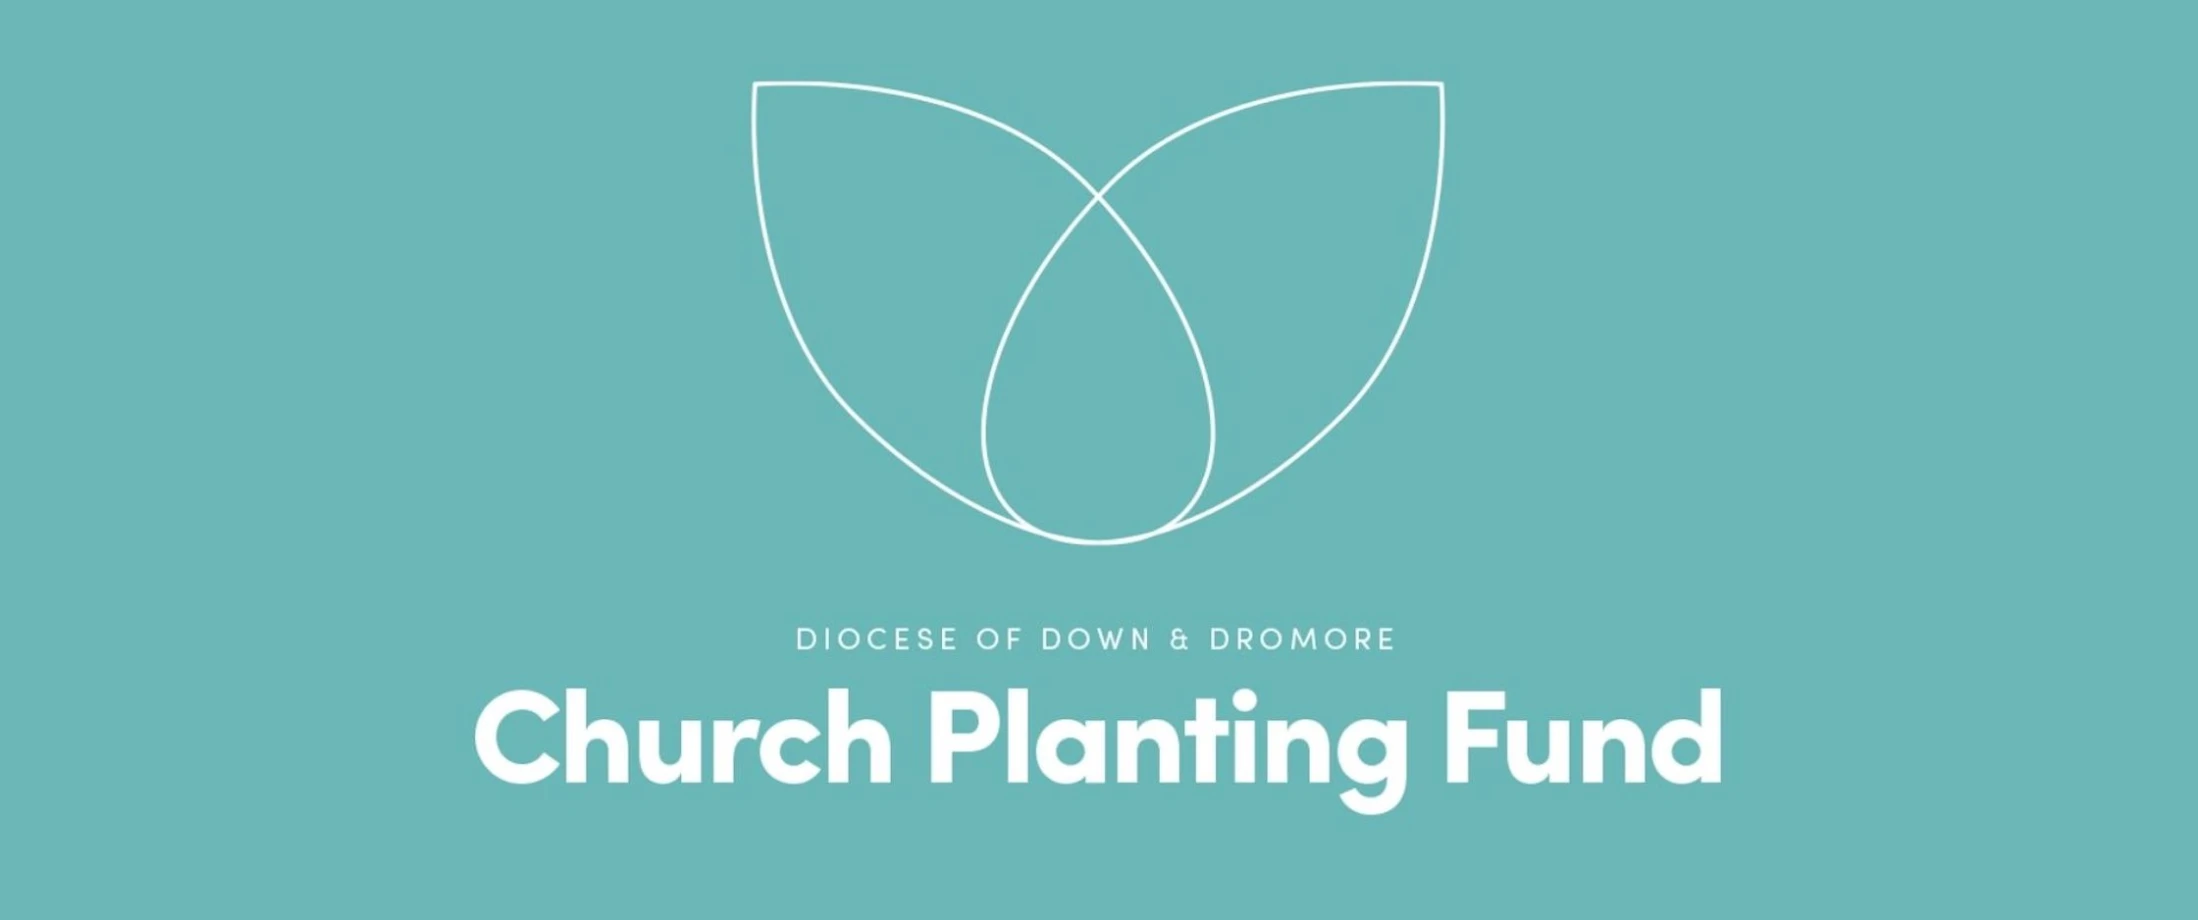 Vocations – Called to Church Planting?